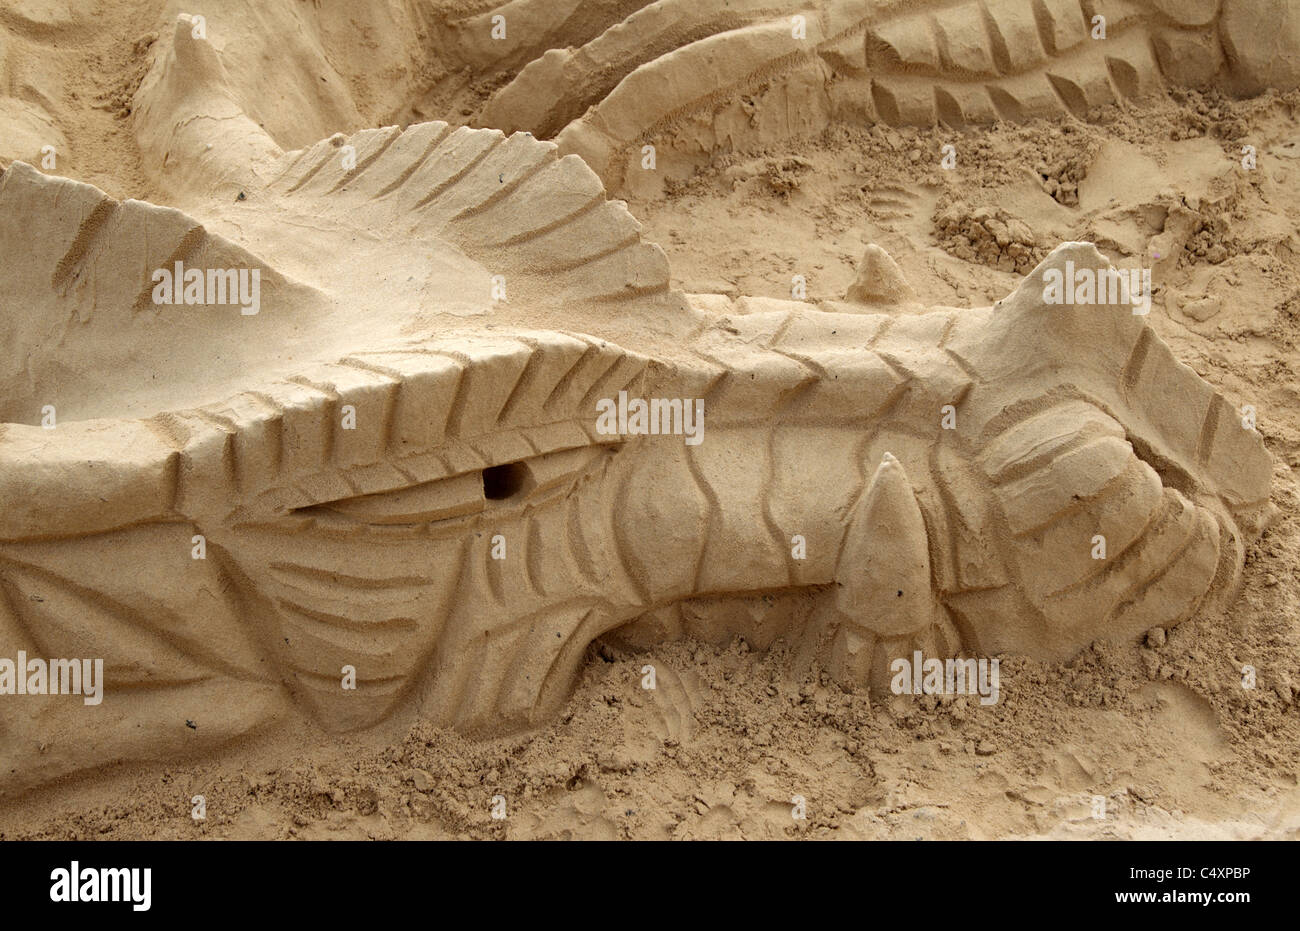 Sand Sculpture of a Dragon on a beach Stock Photo - Alamy